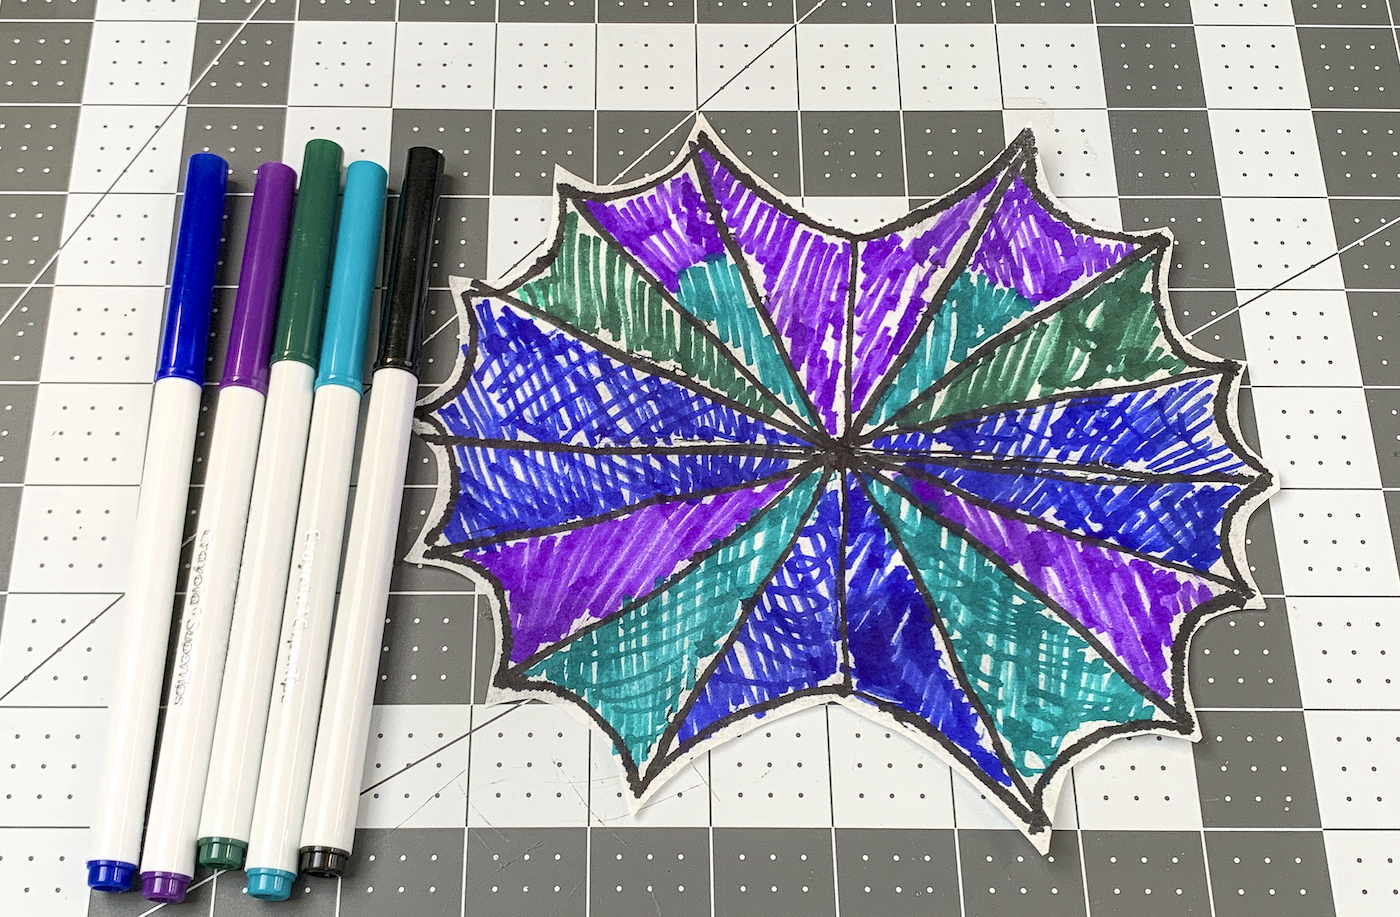 Black, purple, blue, and green markers with lines drawn on the coffee filter